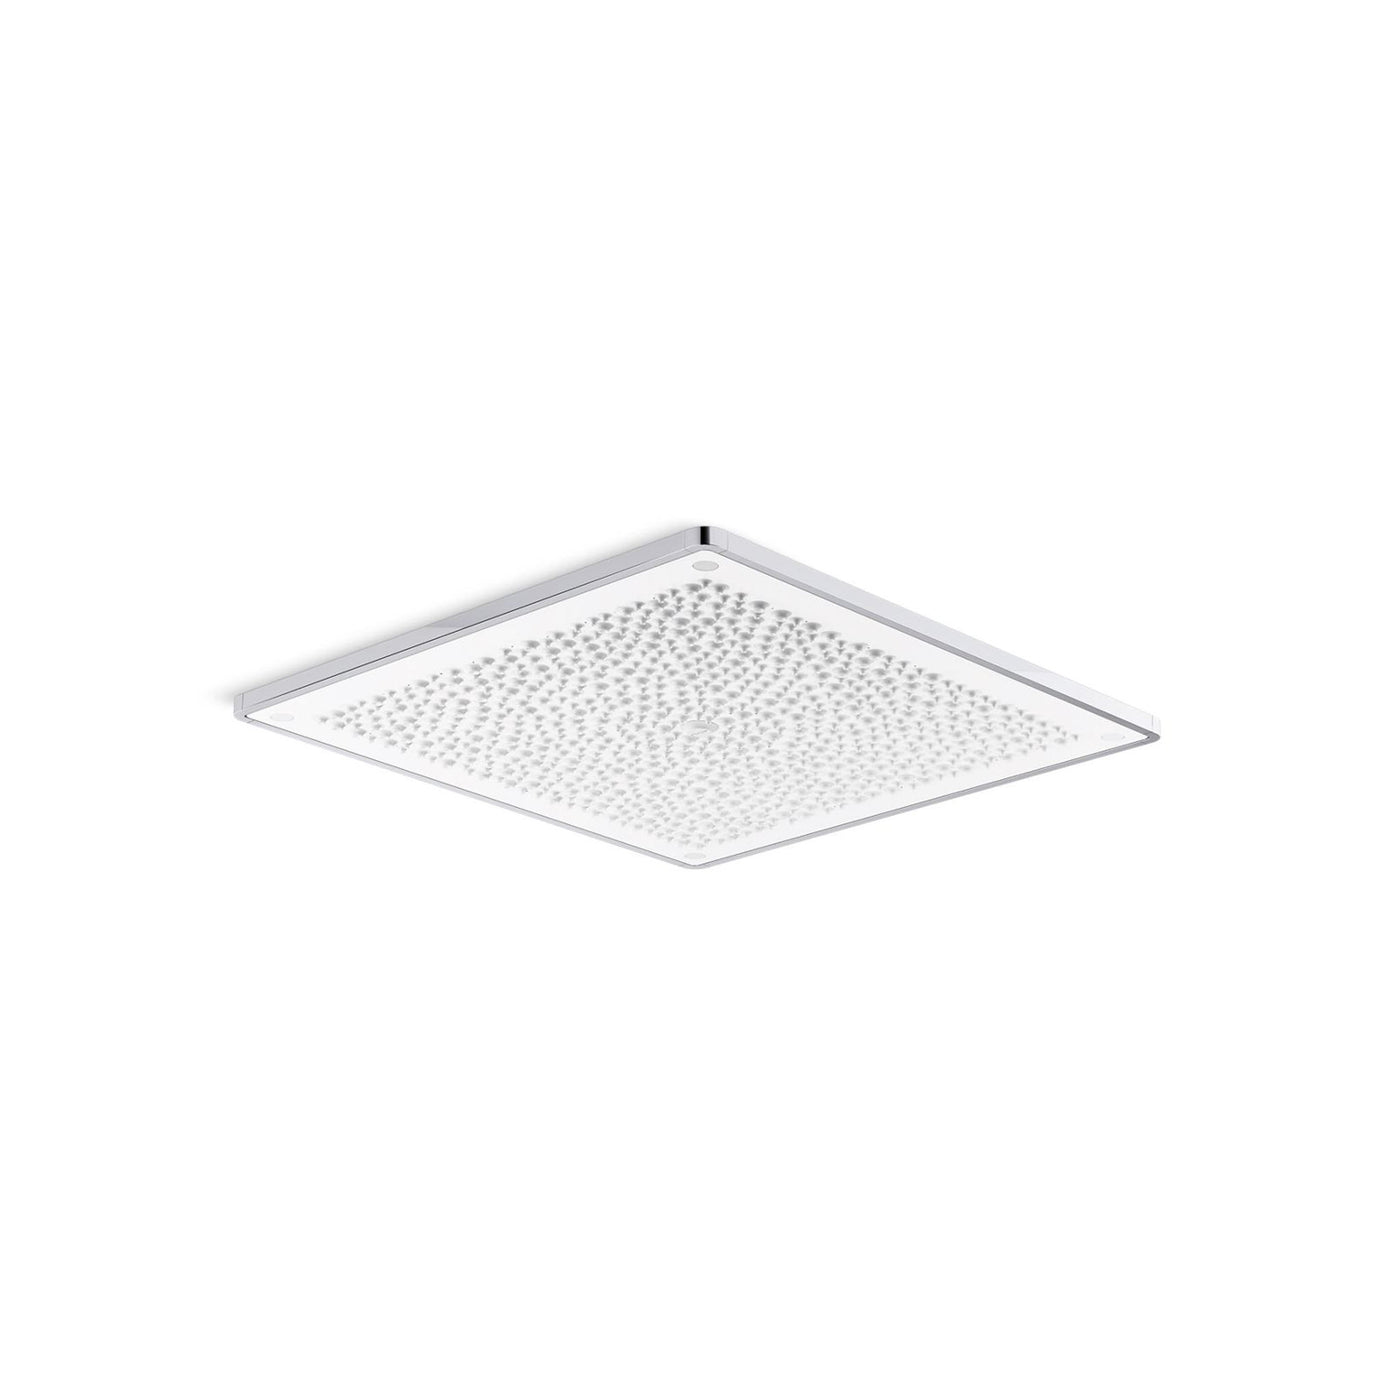 19" Real Rain® two-function overhead shower panel, 2.5 gpm